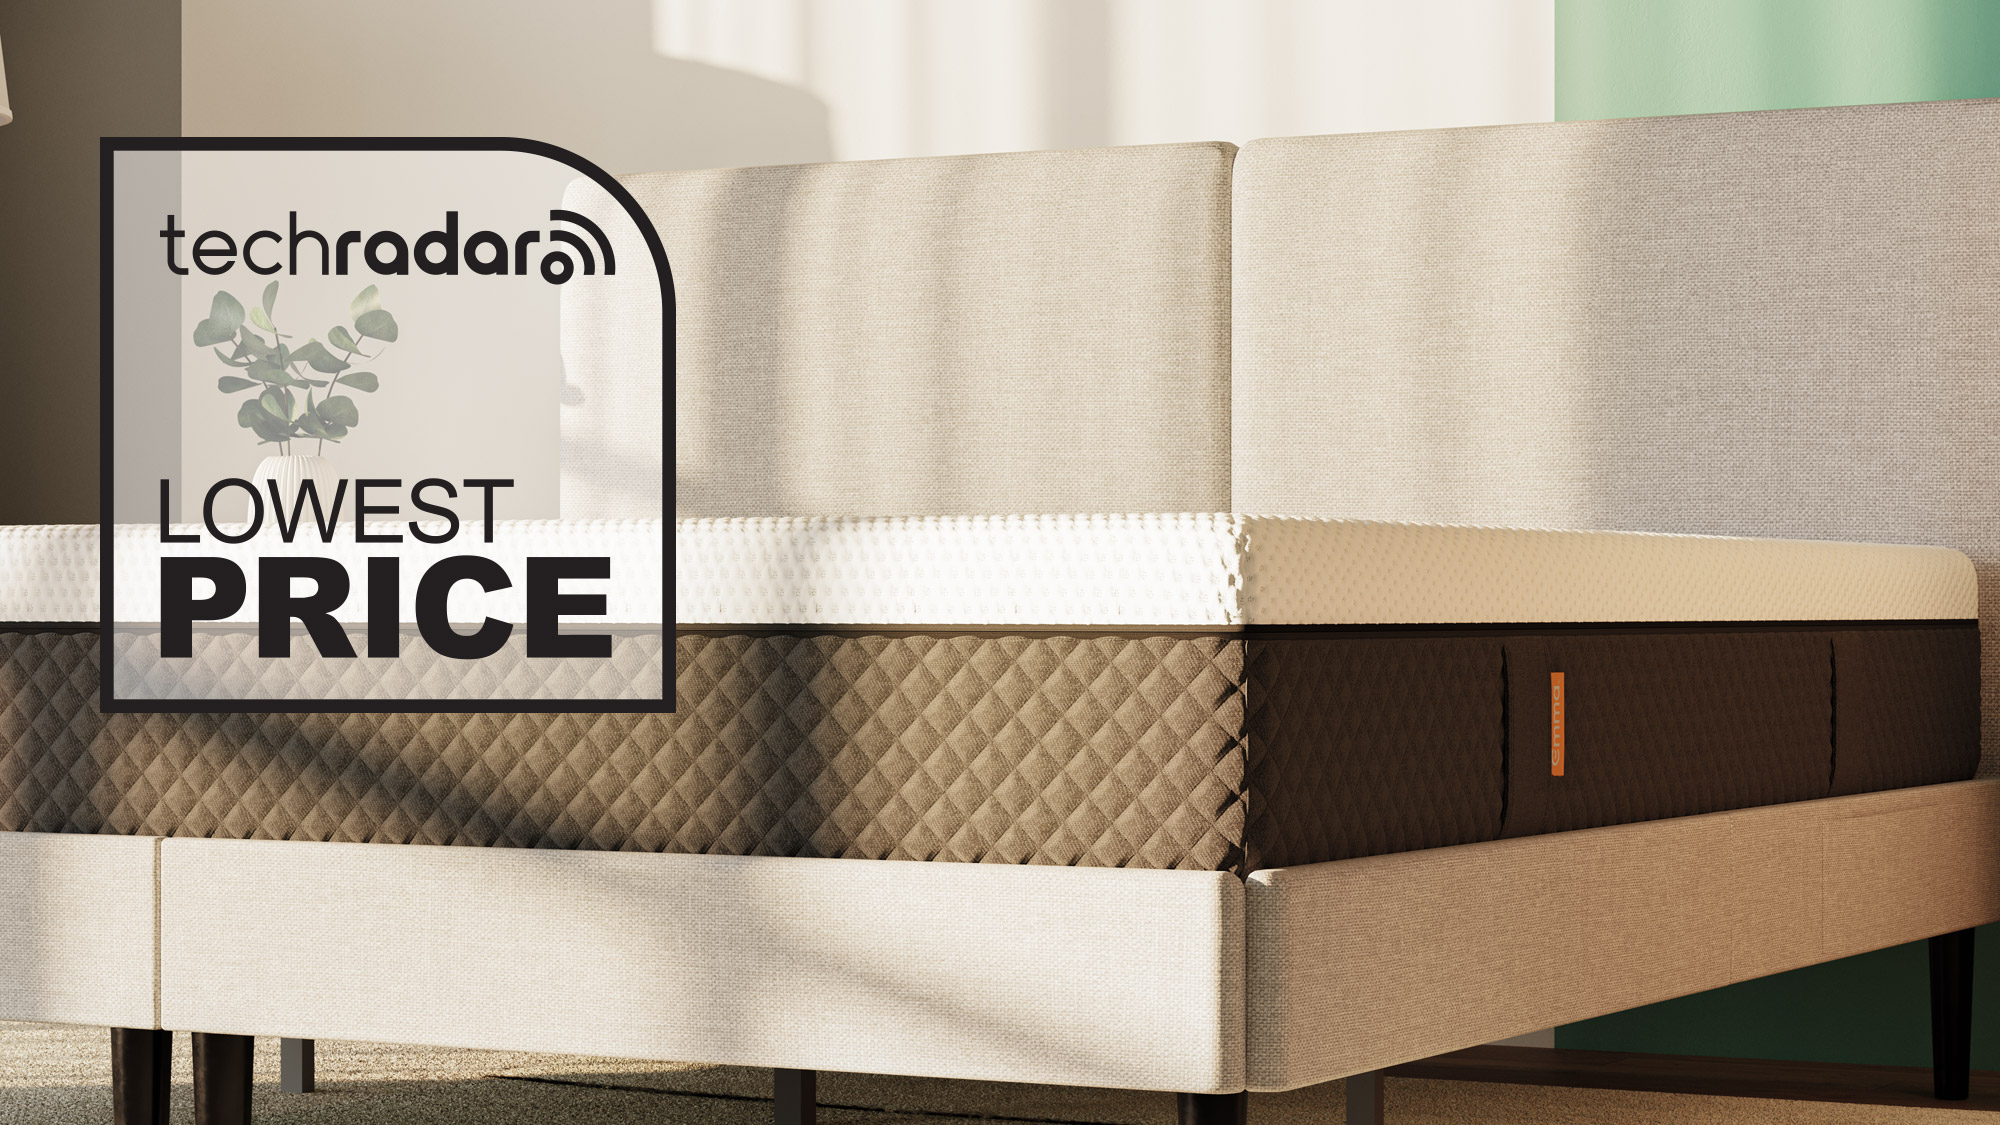 Last chance this year for cheap beds – Boxing Day mattress deals are here! Don’t miss out.